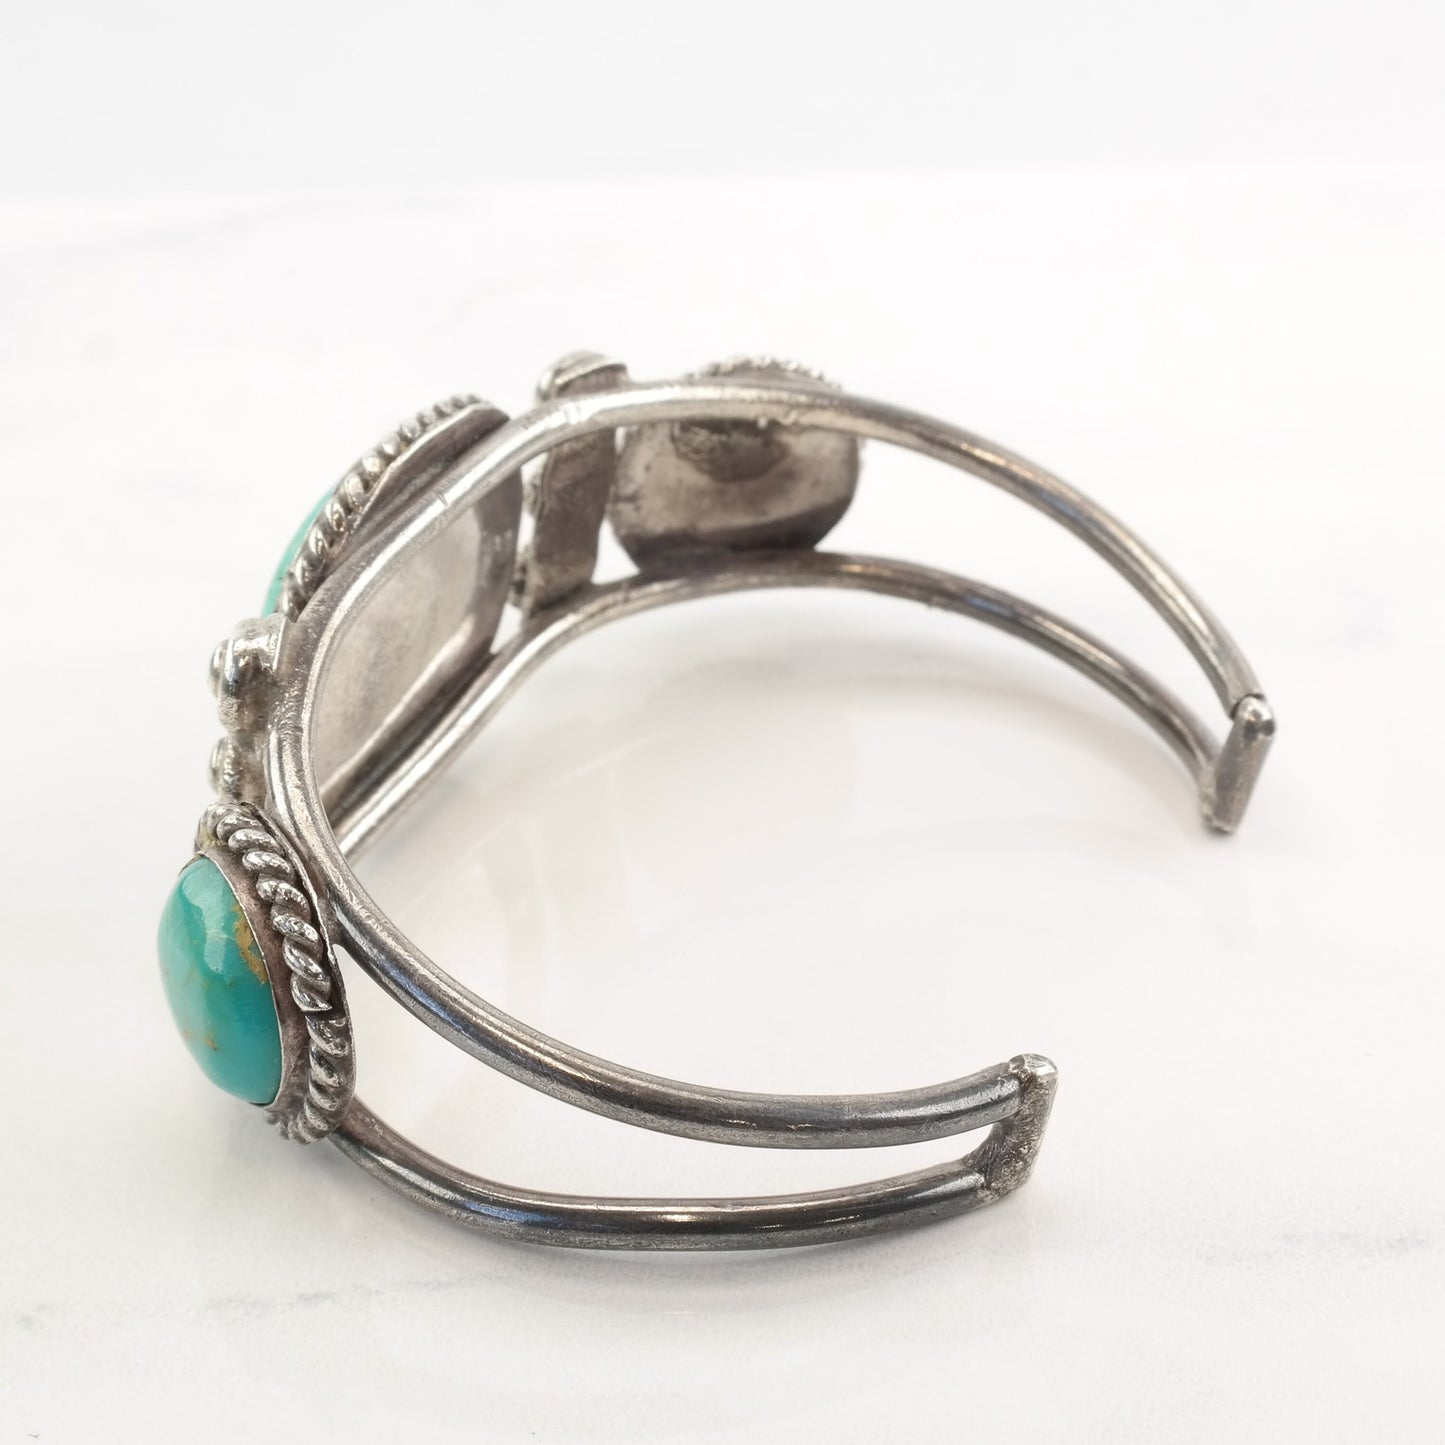 1950 Native American Sterling Silver Cuff Bracelet Turquoise Three Stone